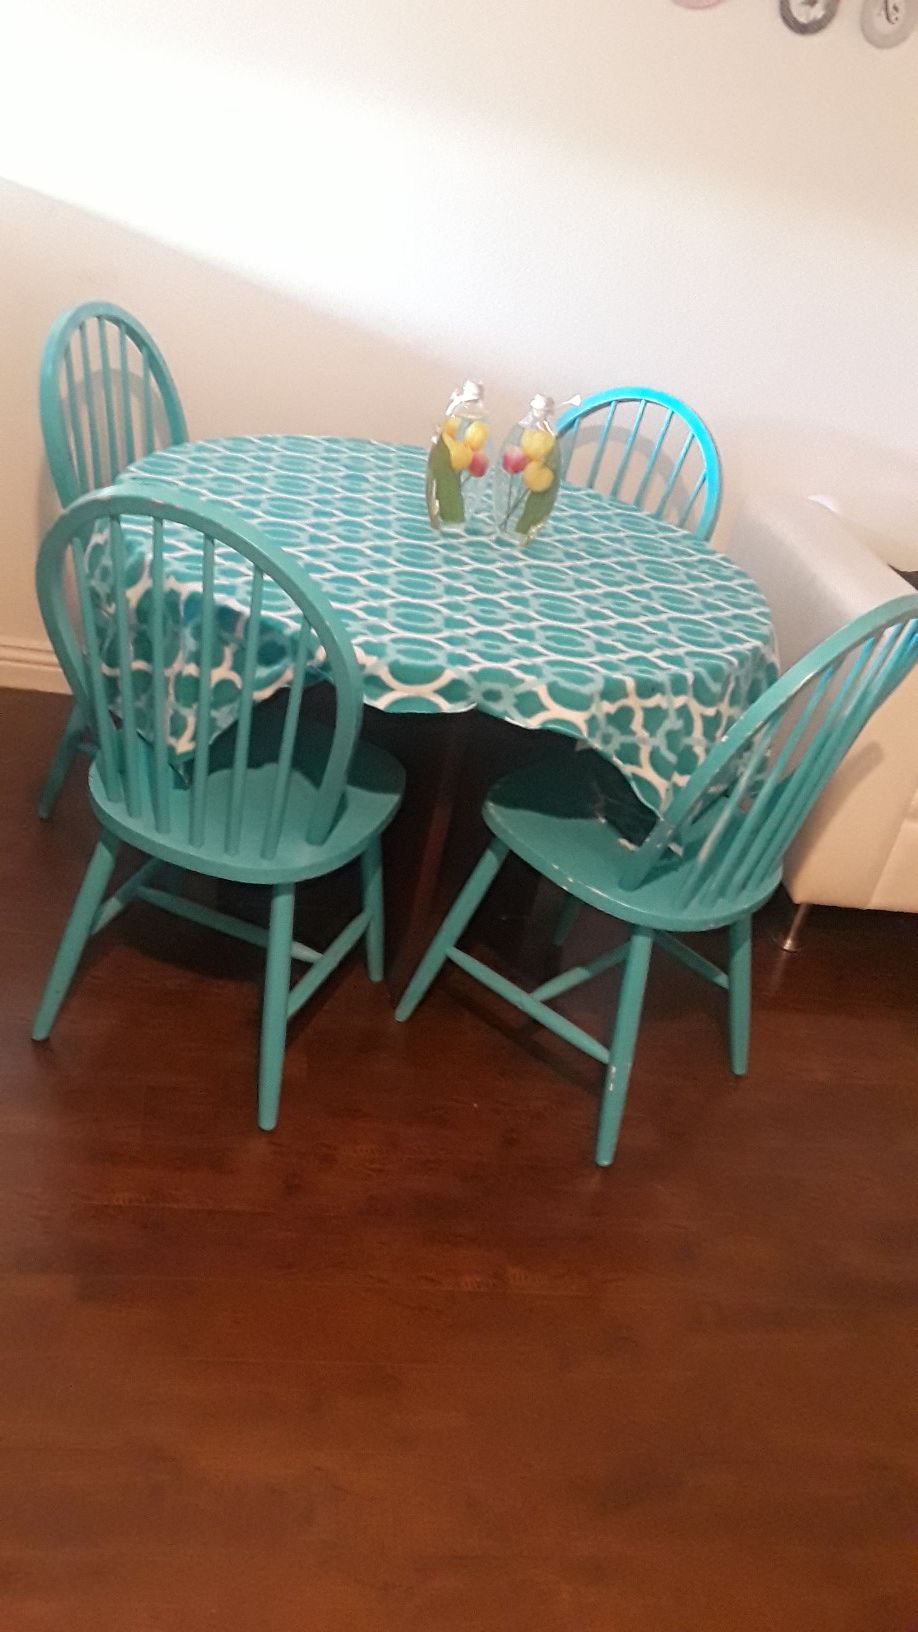 Table with 4 chairs and cover